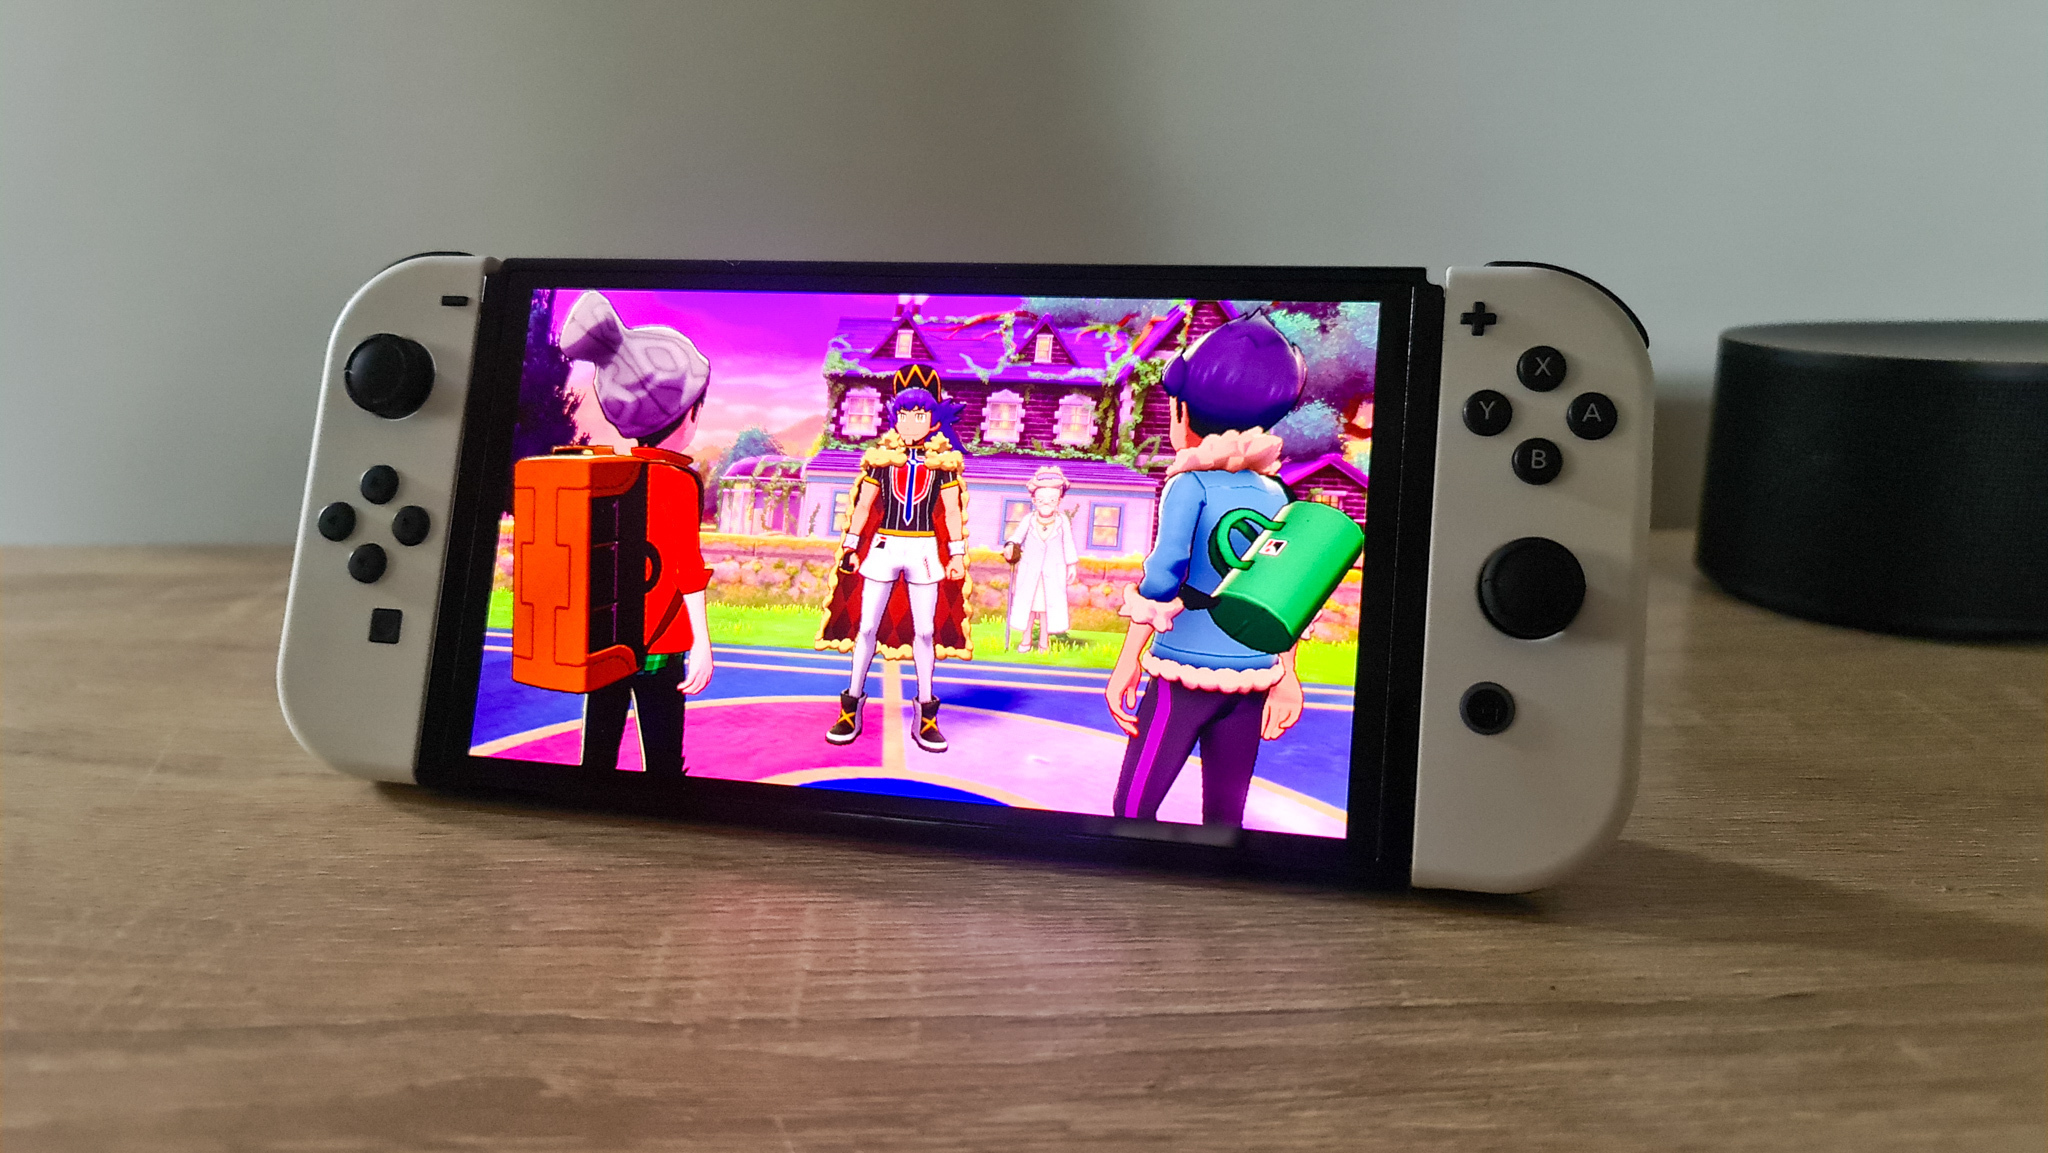 Nintendo Switch OLED Model review: The one to beat